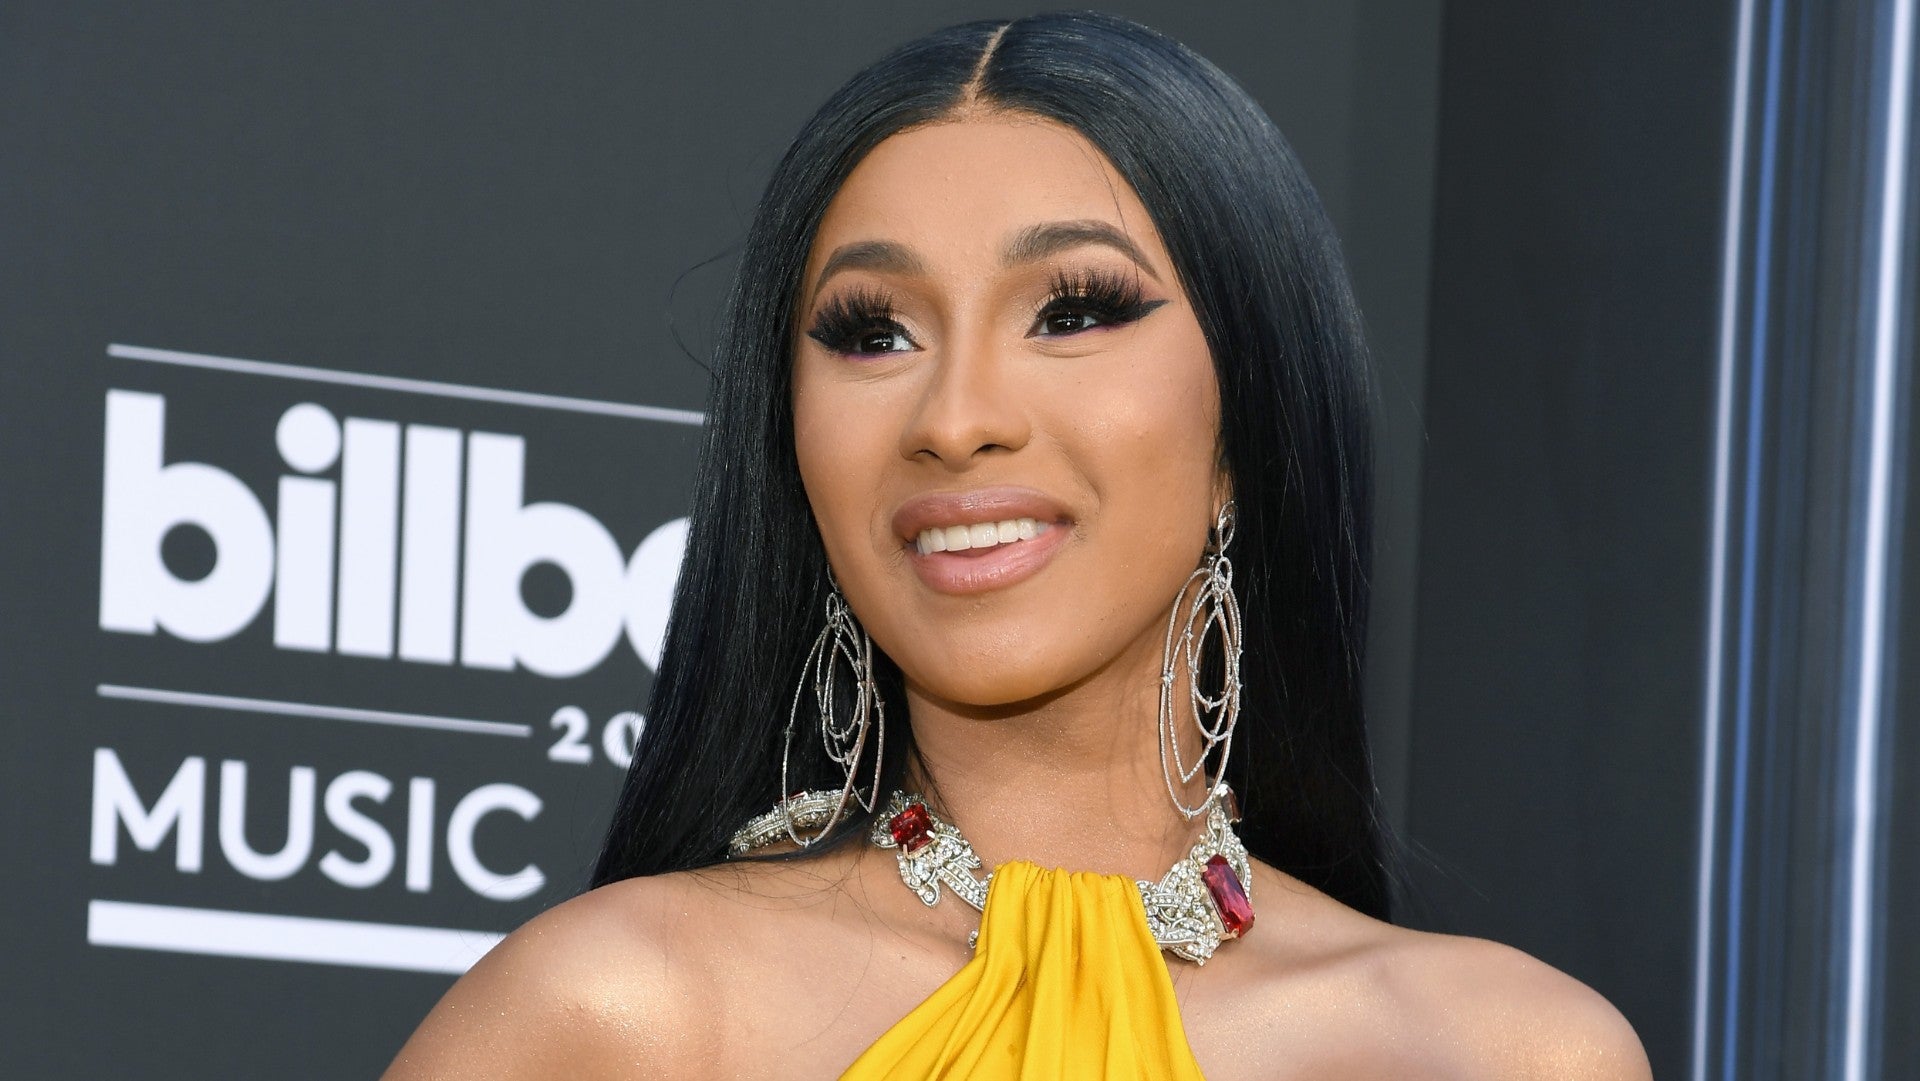 Cardi B Came Through Made In America Festival Dripping In A Jewel Ponytail